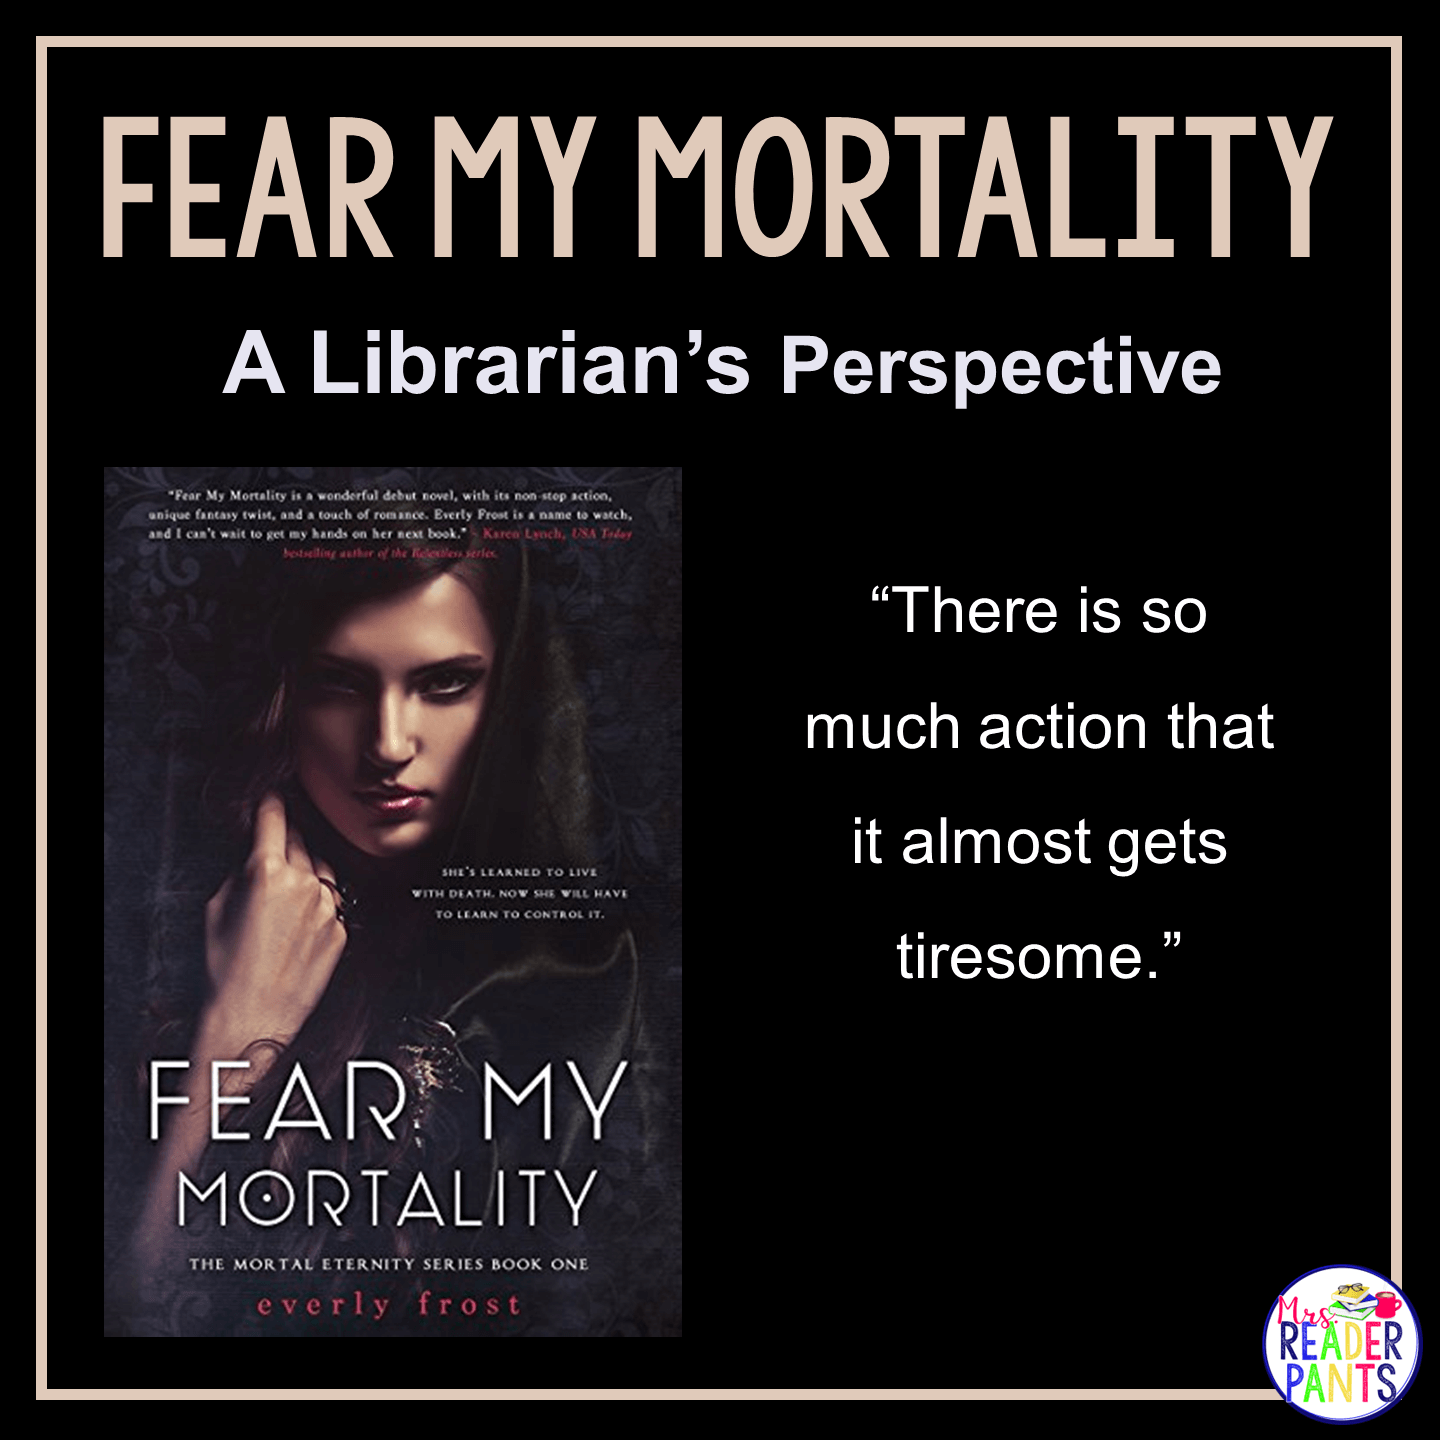 This is a Librarian's Perspective Review of Fear My Mortality by Everly Frost.